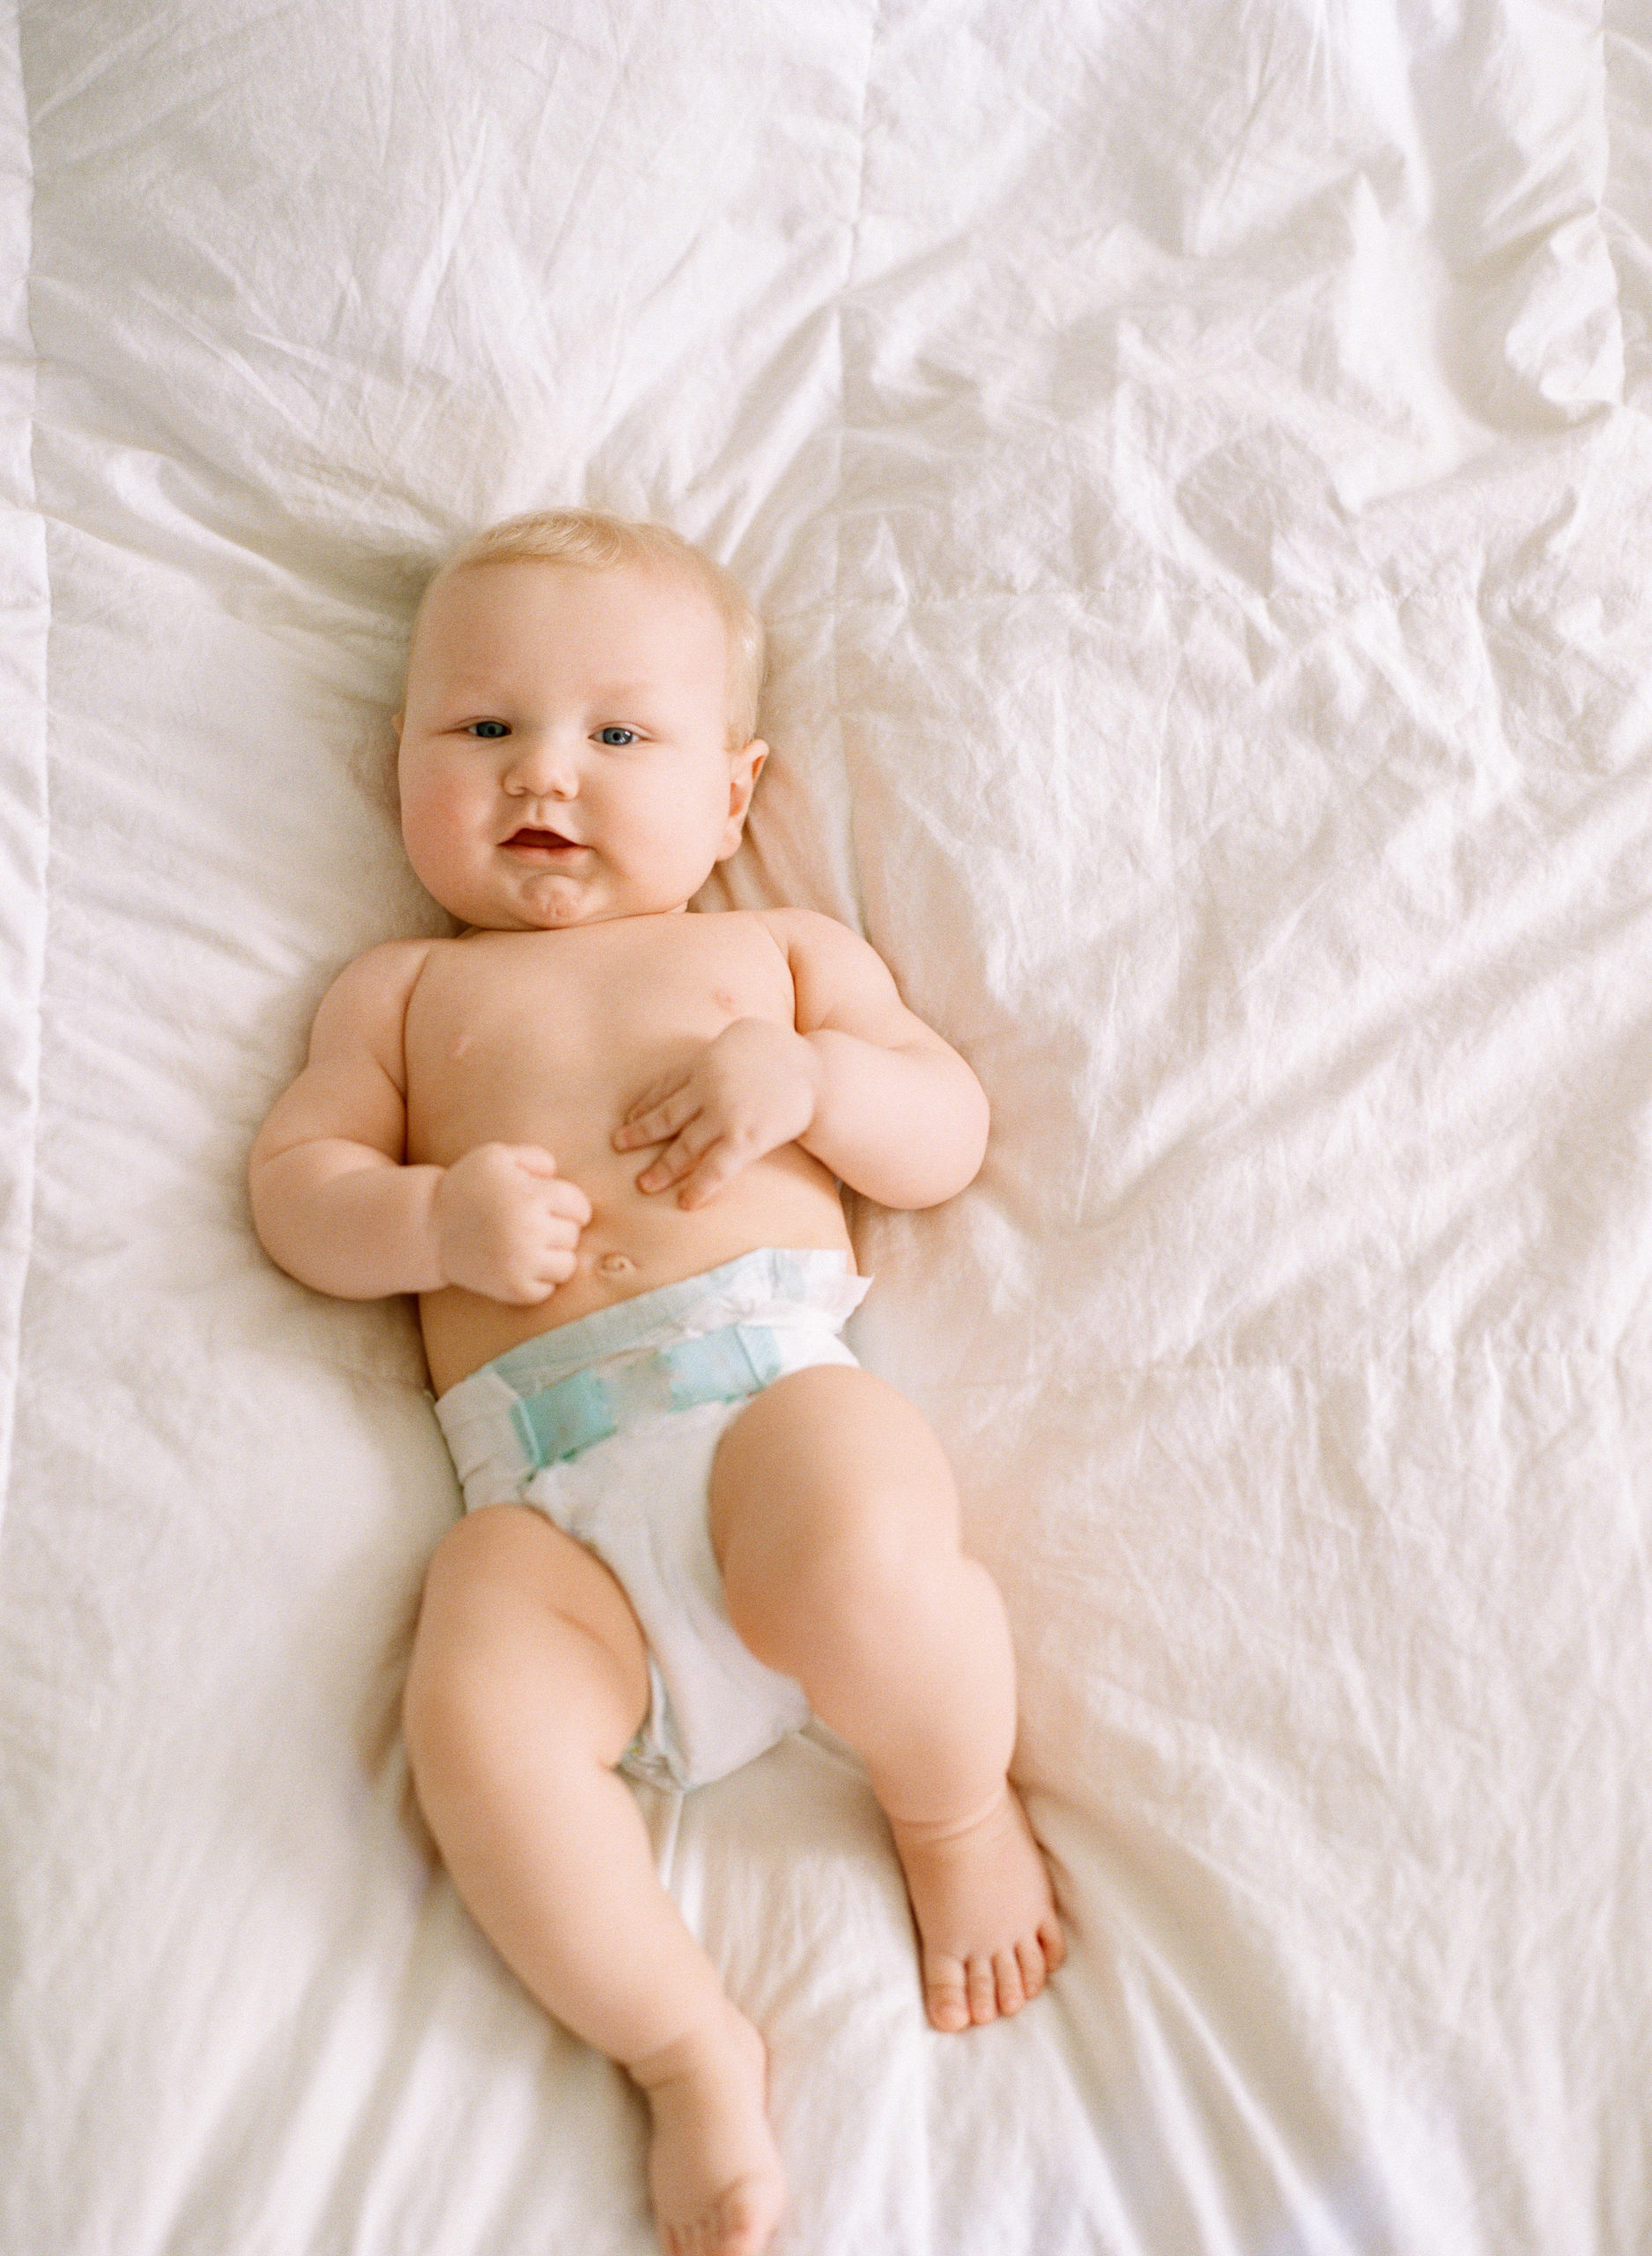 chubby six month blonde baby on a white duvet looking at the camera